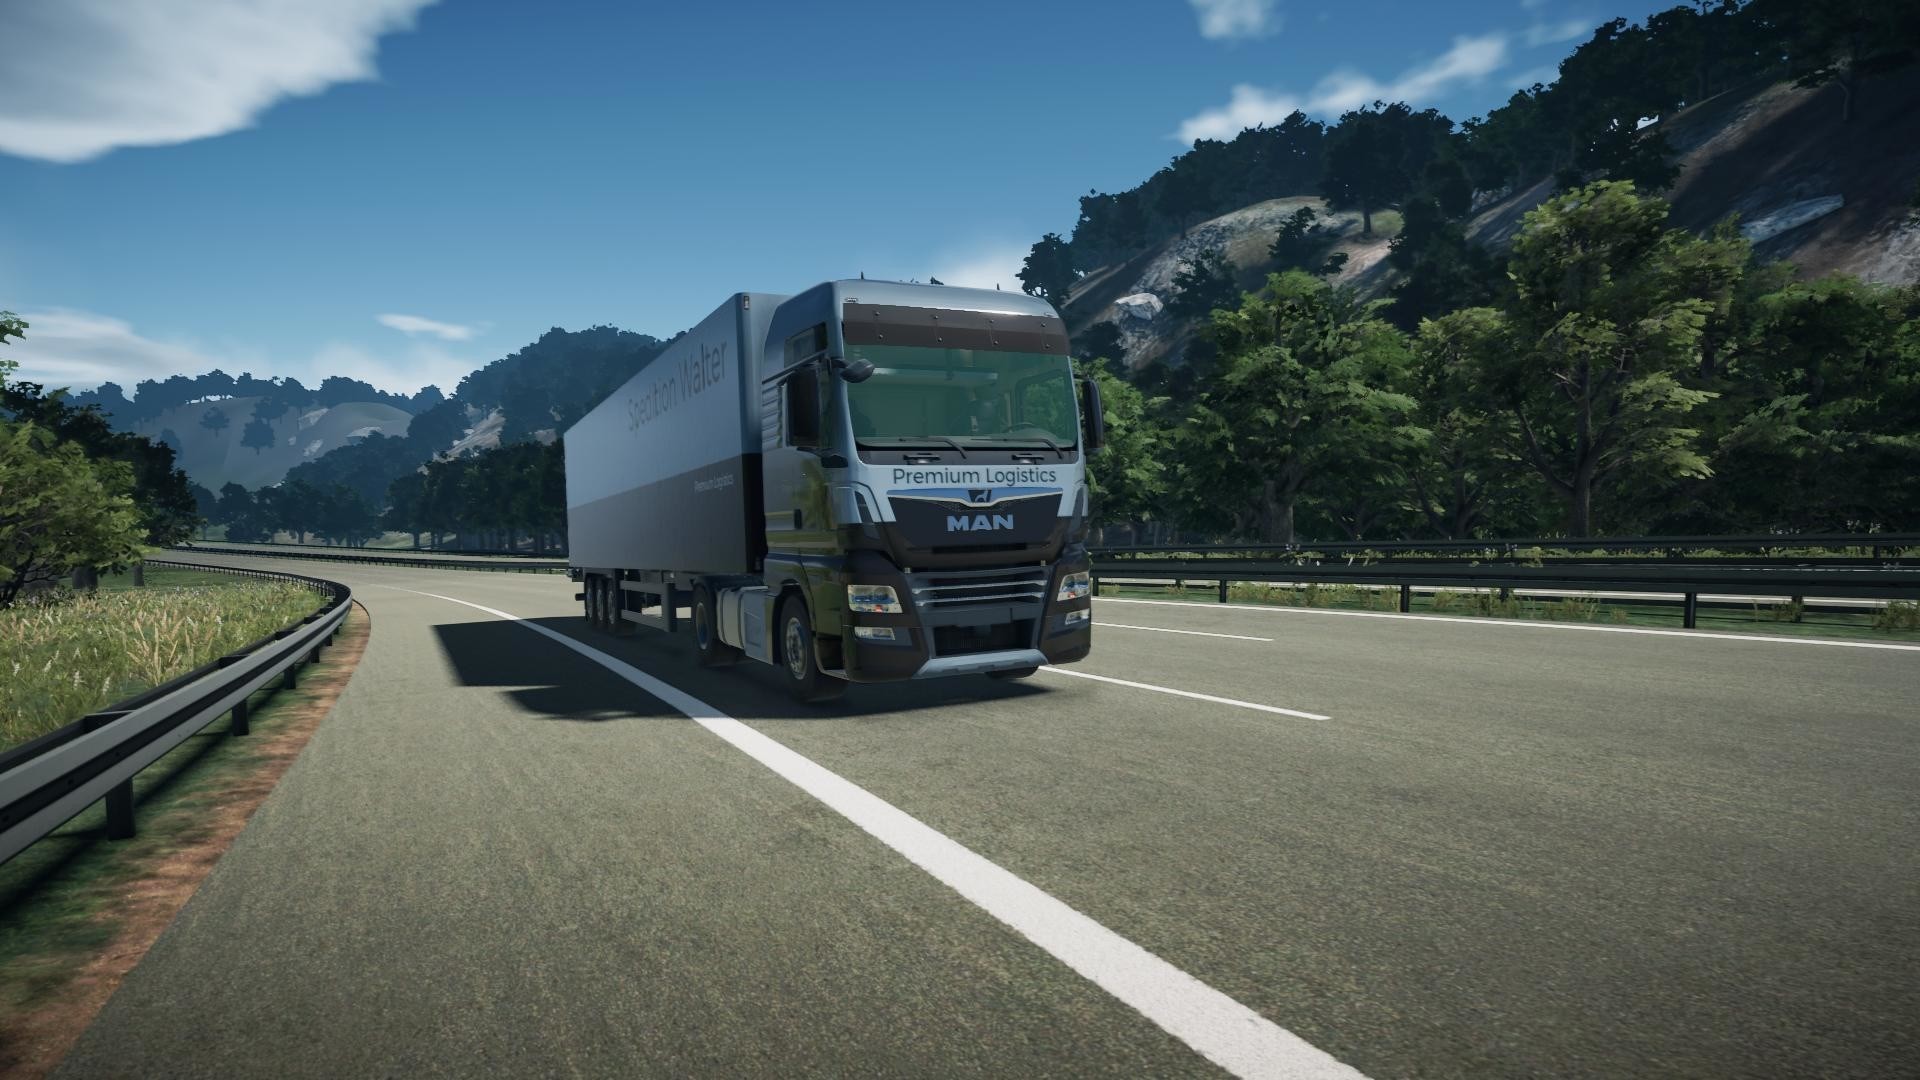 On the Road The Truck Simulator – February 11